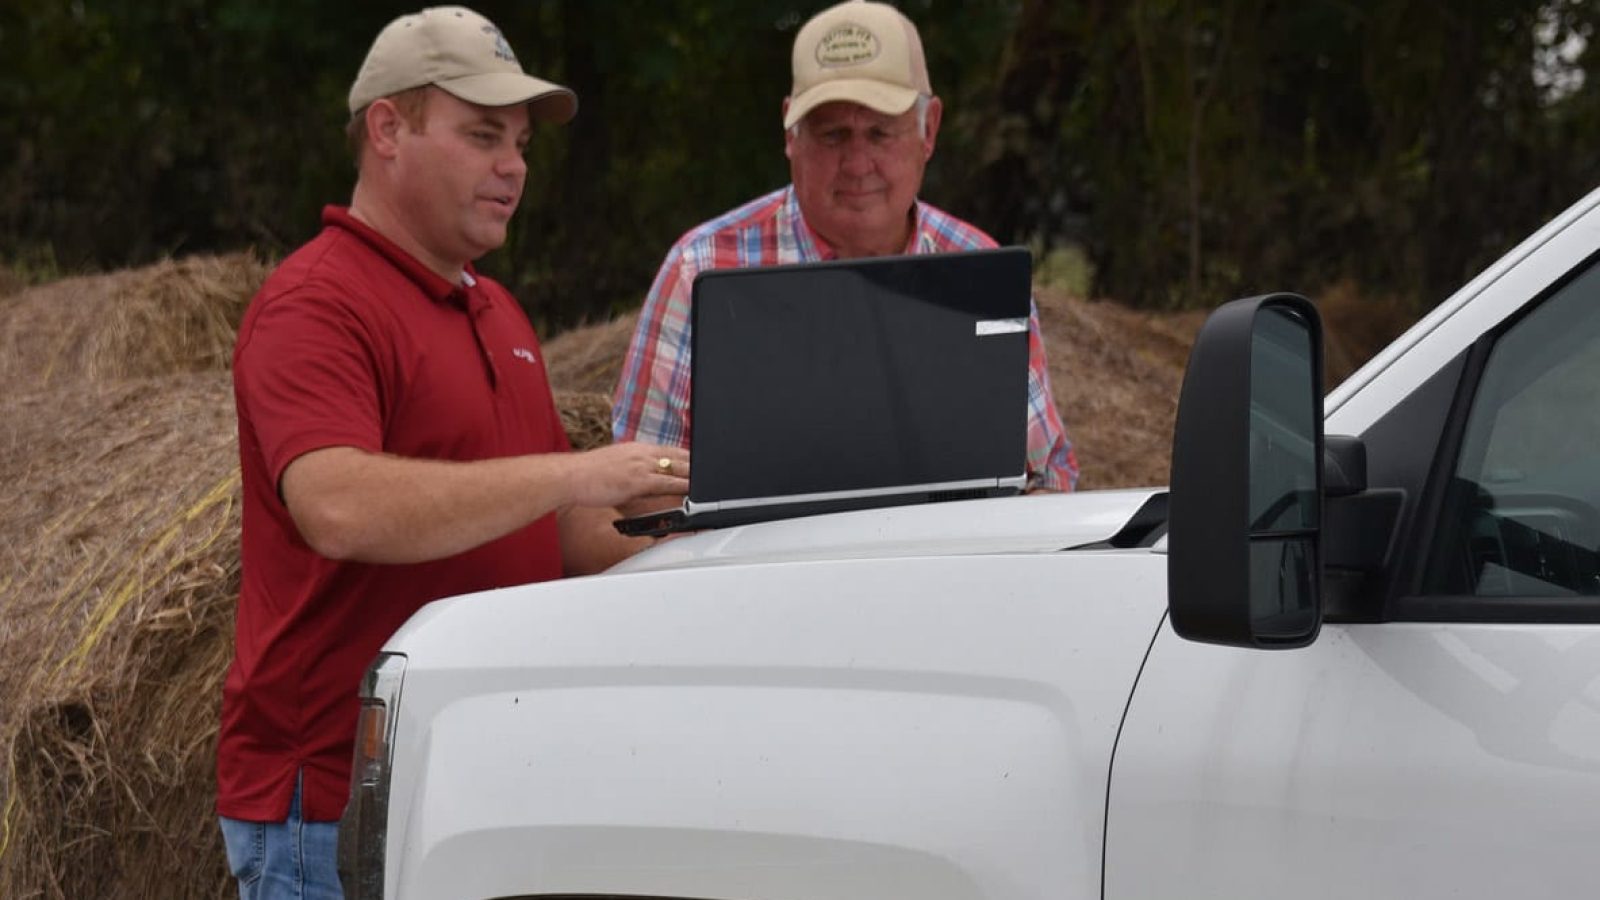 Ranchers with computer